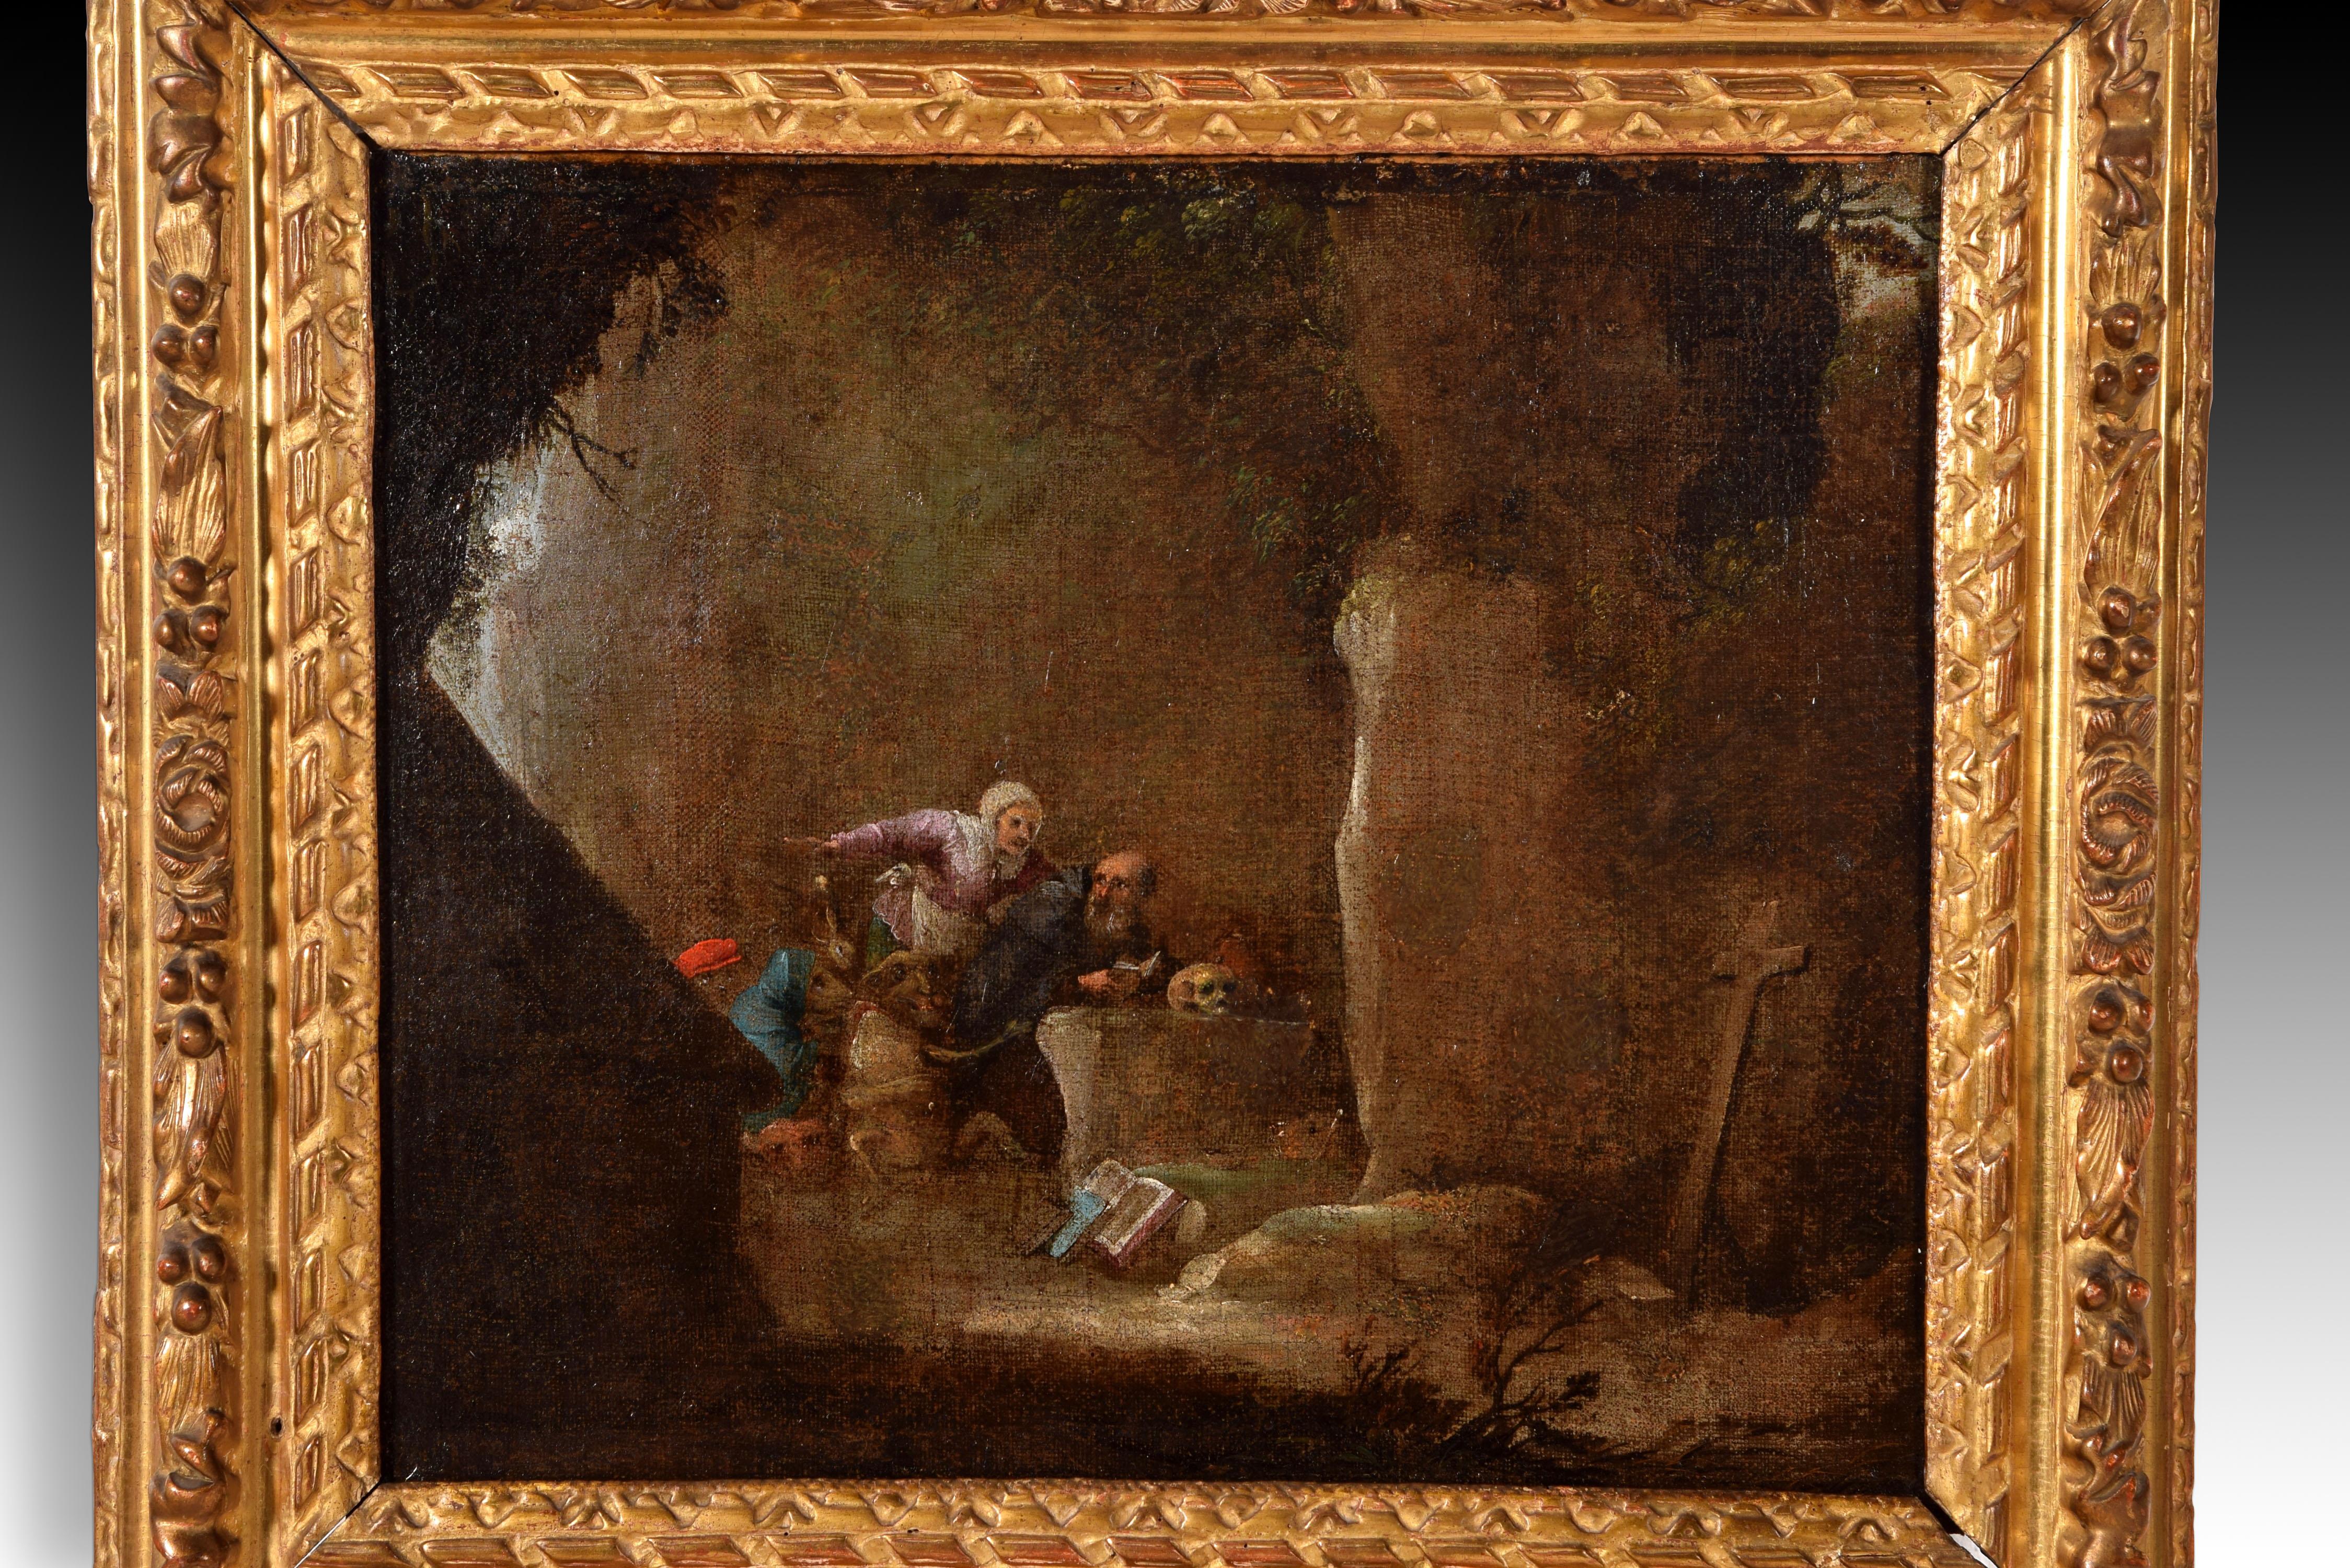 Temptations of San Antonio Abad. Oil on canvas. 17th century, following the model of David Teniers II (Antwerp, 1610-Brussels, 1690). 
Oil on canvas showing a figurative scene located inside a cave. To the right, you can see a cross standing,